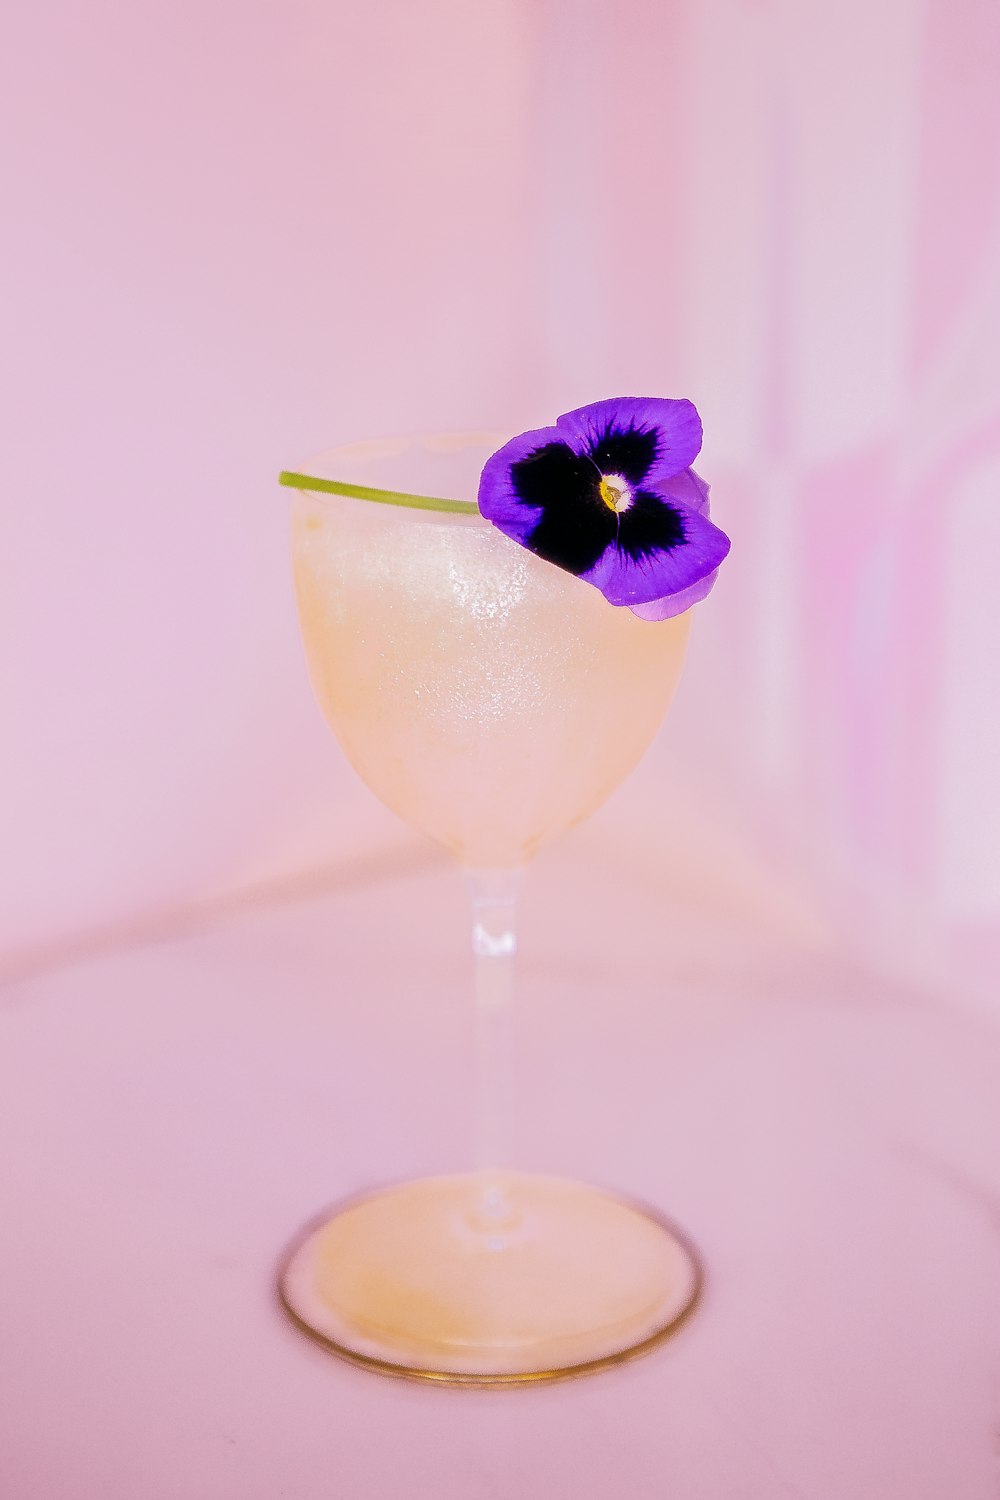 a glass with a flower in it